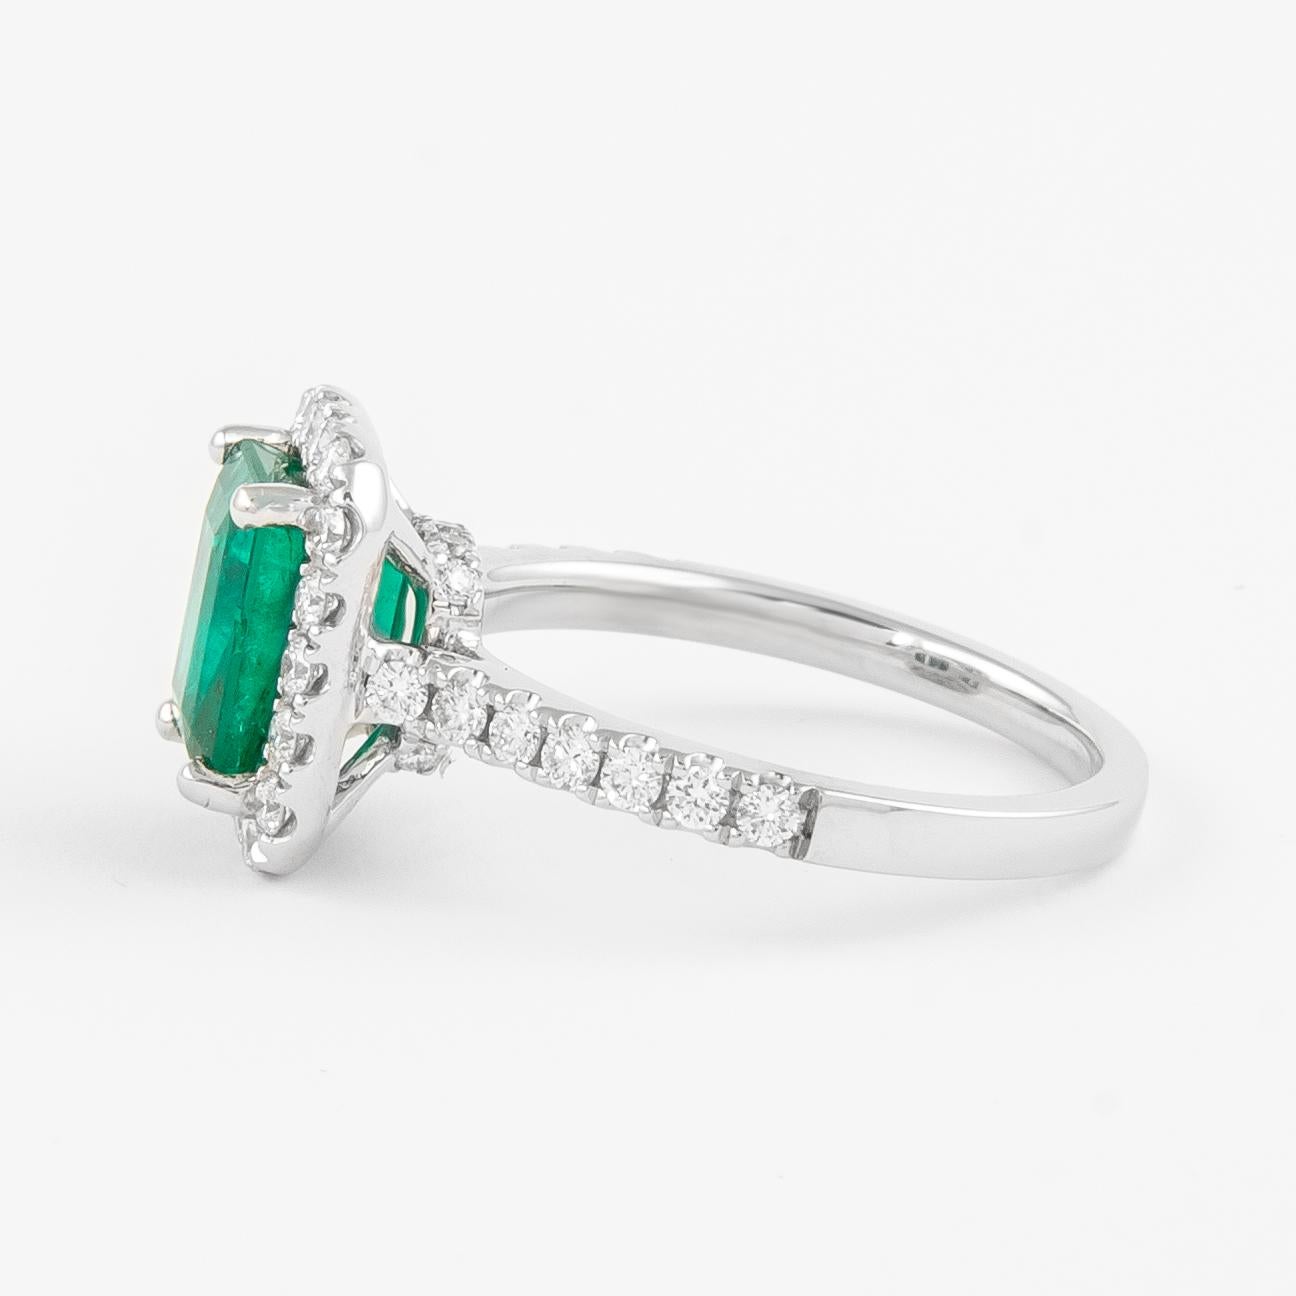 Emerald Cut GIA 2.52 Carat Emerald and Diamond Halo Ring 18k Gold For Sale